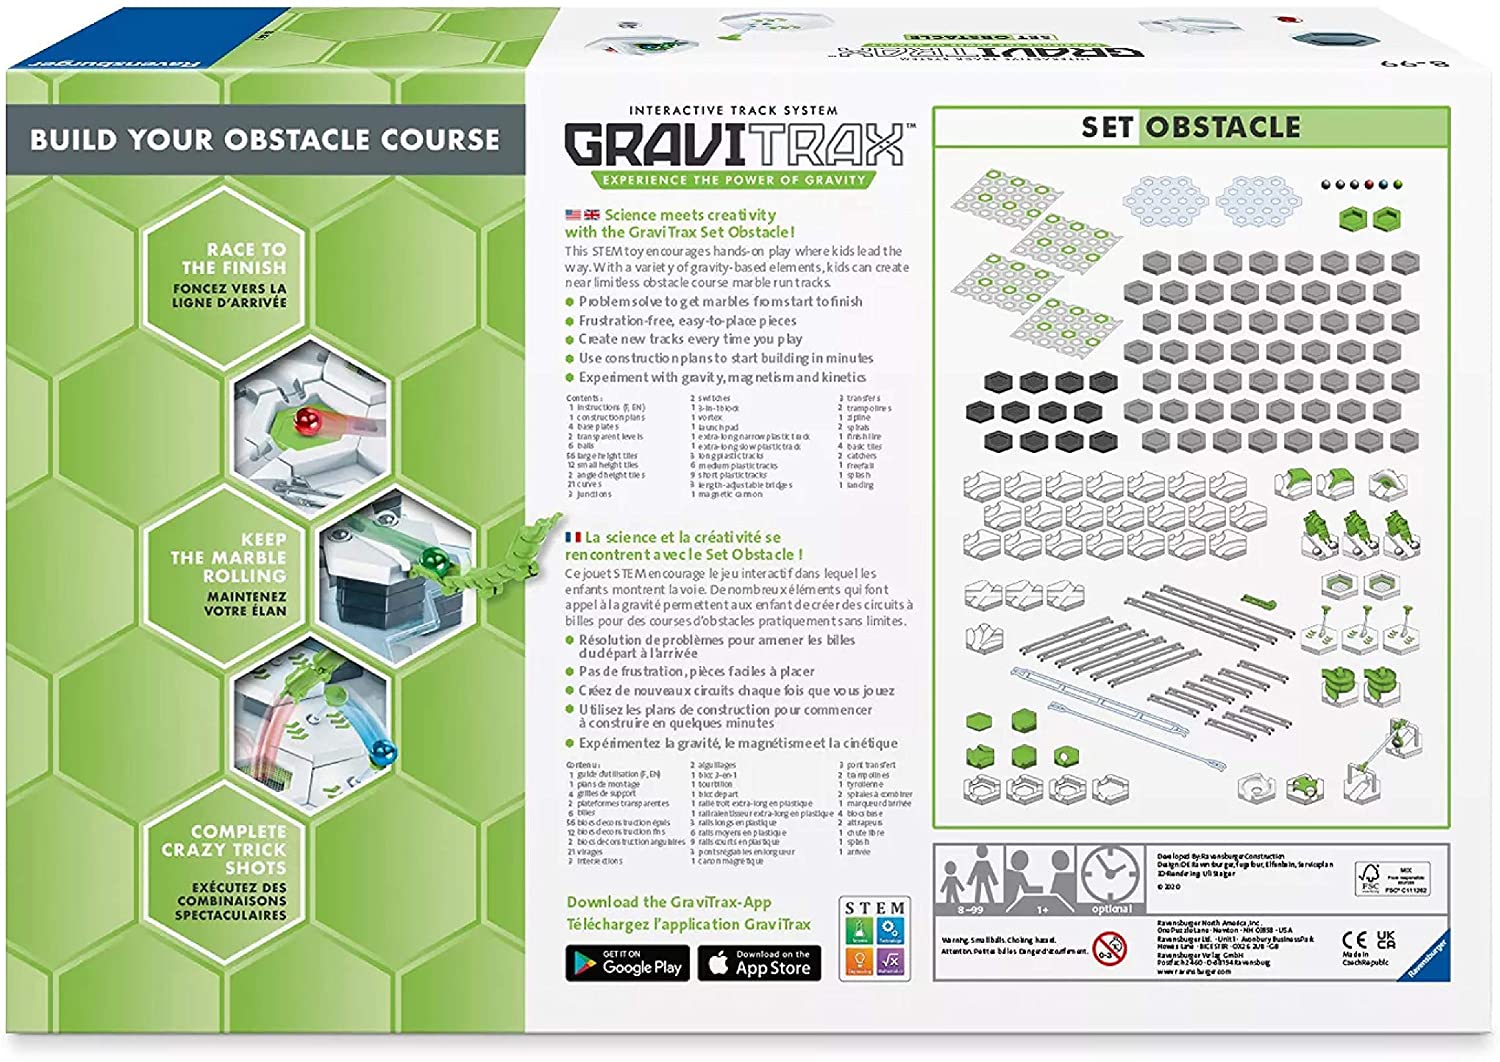 GRAVITRAX BOOK: What can you expect? (Construction plans